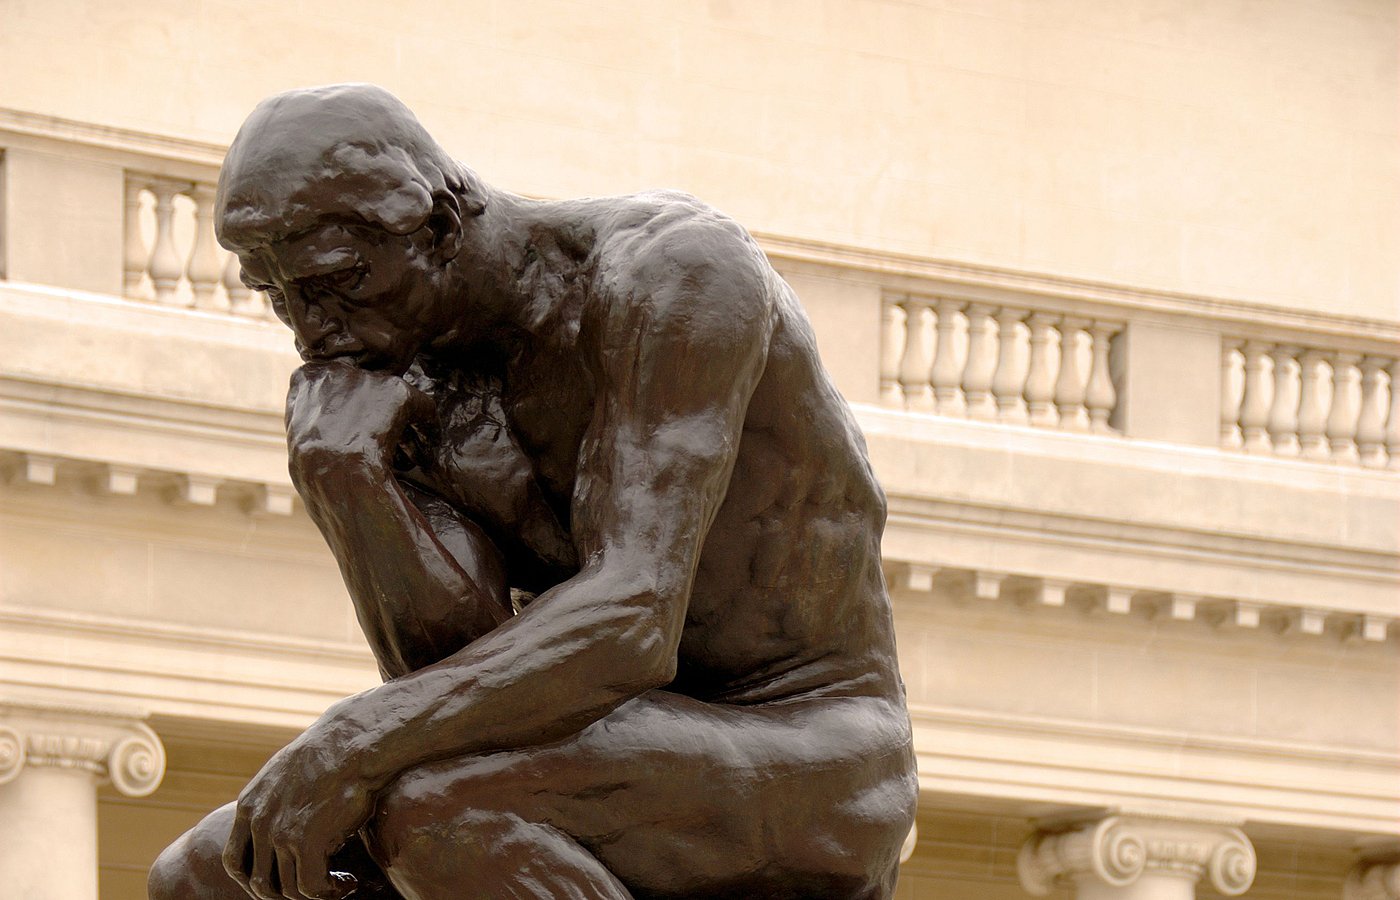  The Thinker, Auguste Rodin  